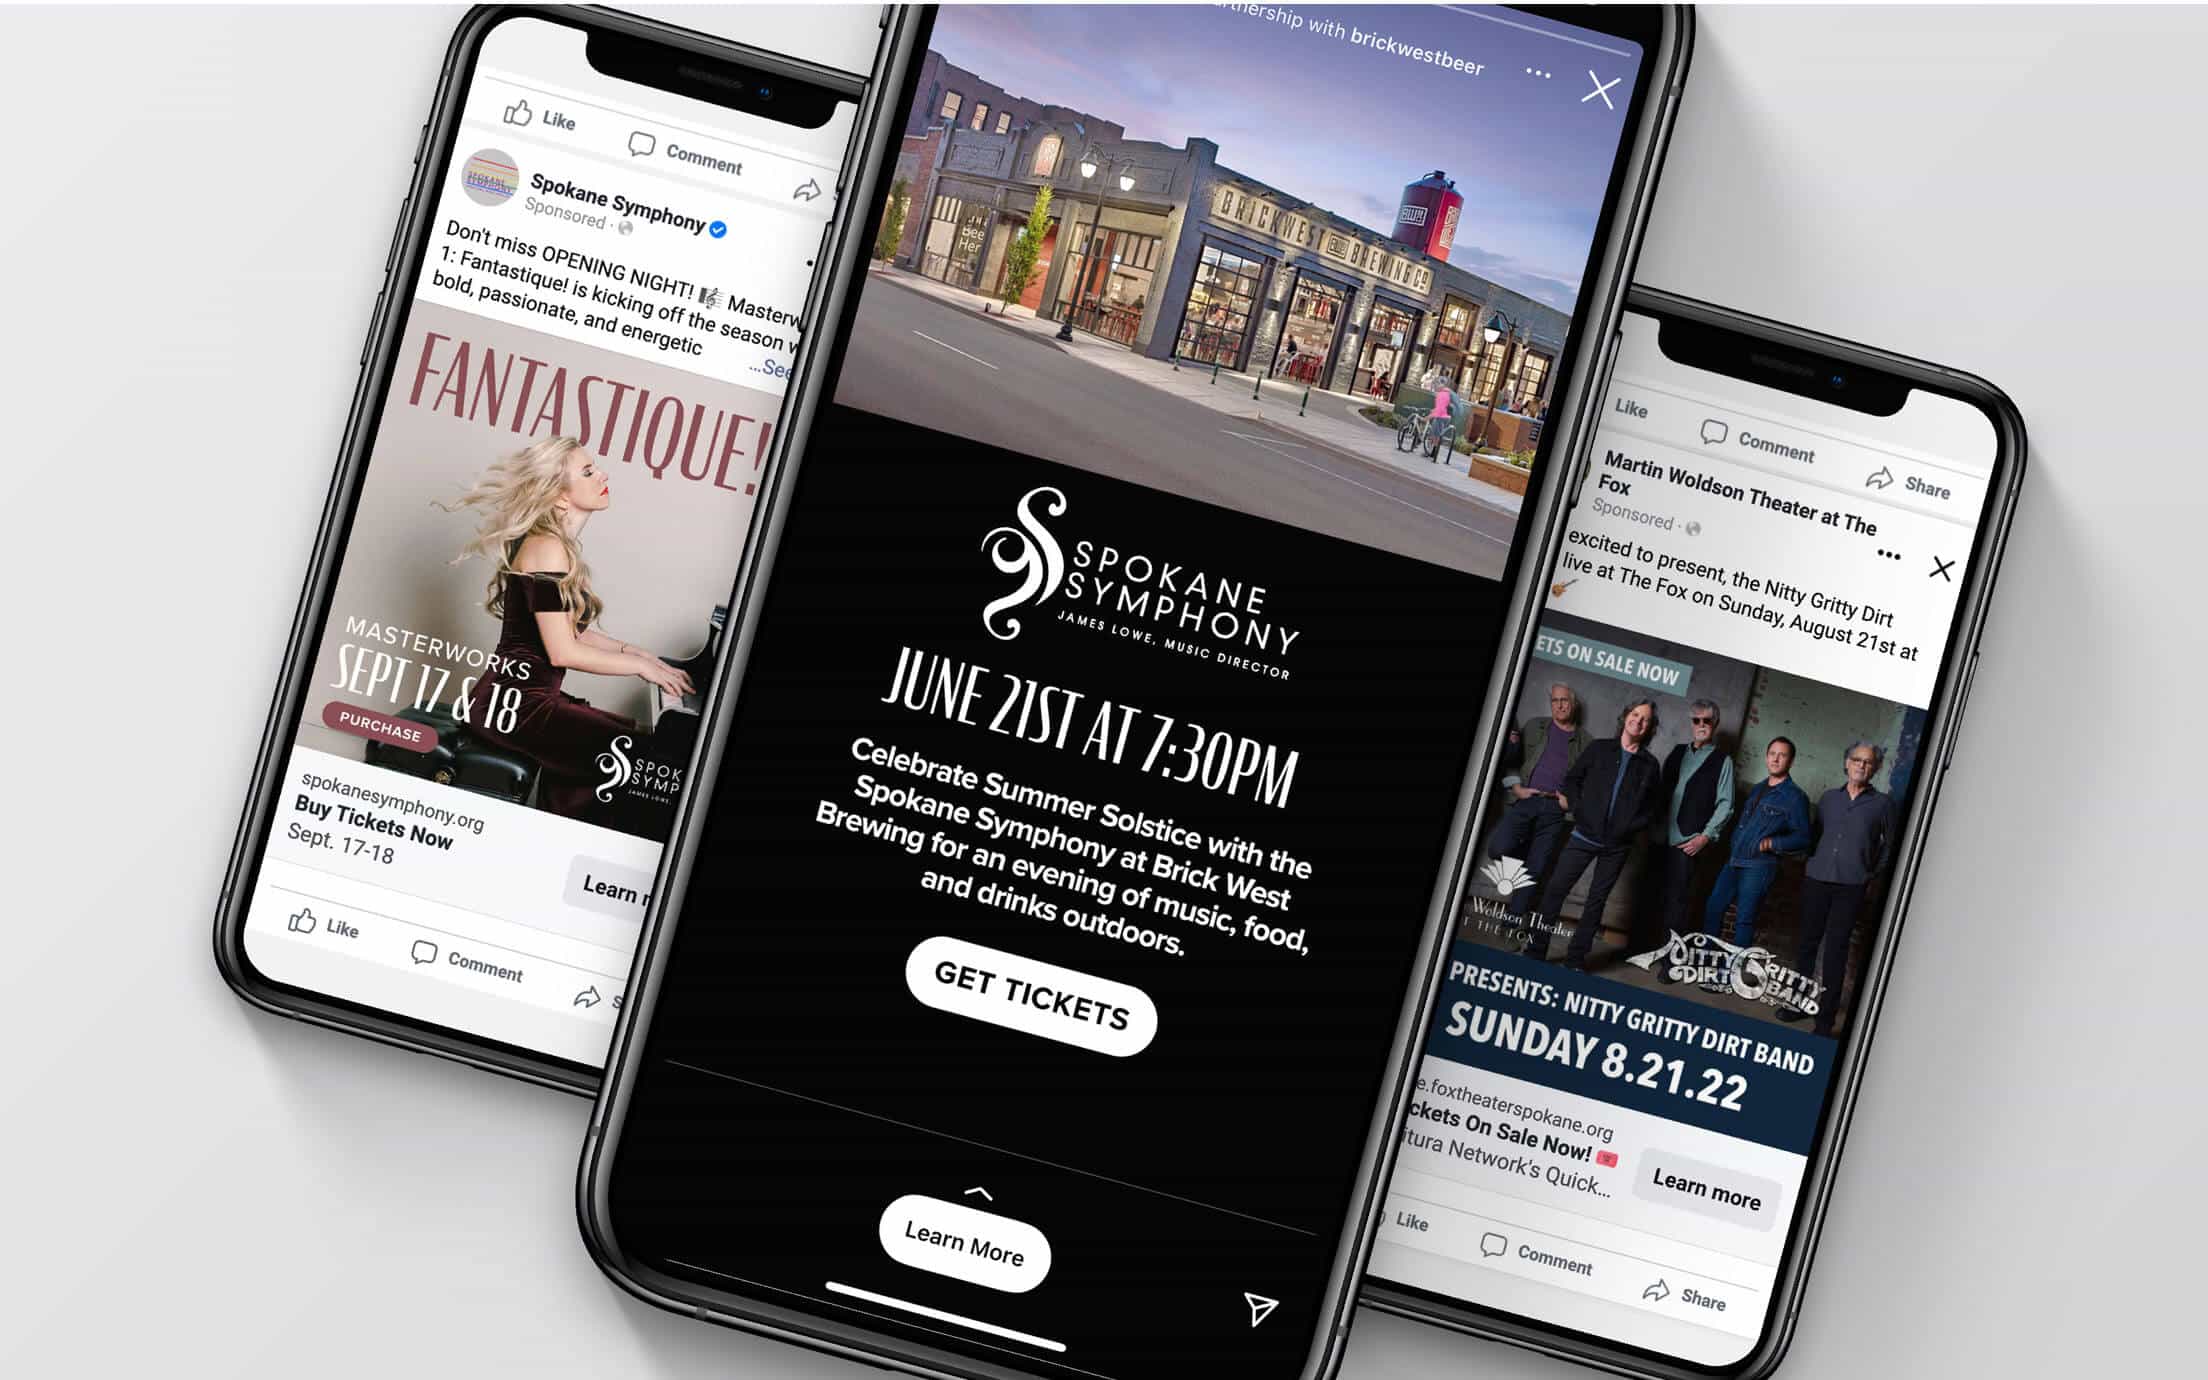 Spokane Symphony and The Fox Theater Social Ads